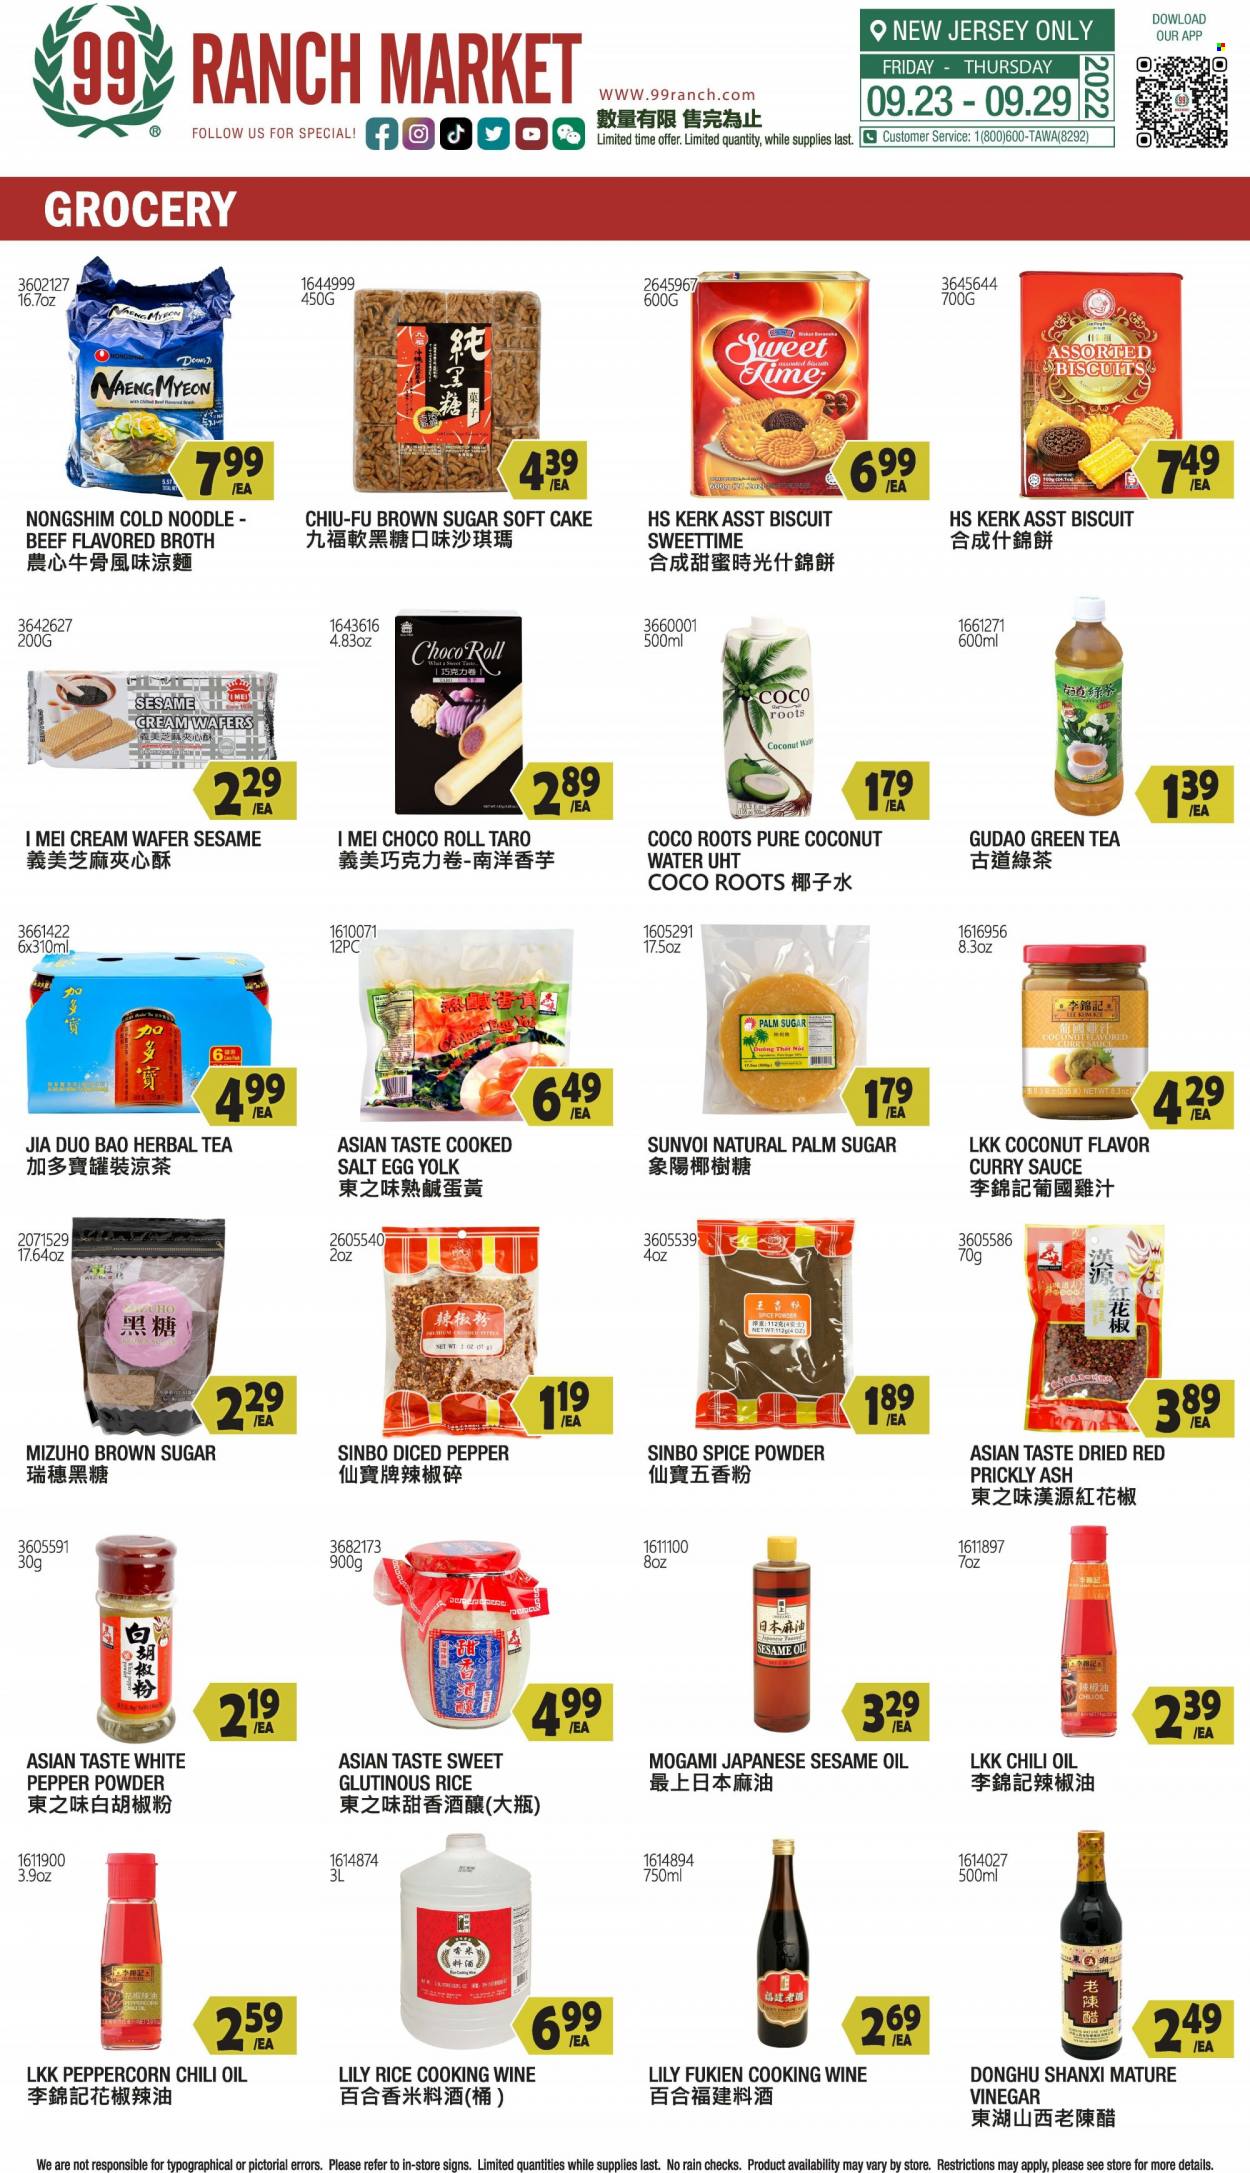 thumbnail - 99 Ranch Market Flyer - 09/23/2022 - 09/29/2022 - Sales products - cake, sauce, noodles, eggs, wafers, biscuit, cane sugar, salt, broth, rice, pepper, spice, curry sauce, sesame oil, vinegar, oil, coconut water, green tea, tea, herbal tea, cooking wine. Page 2.